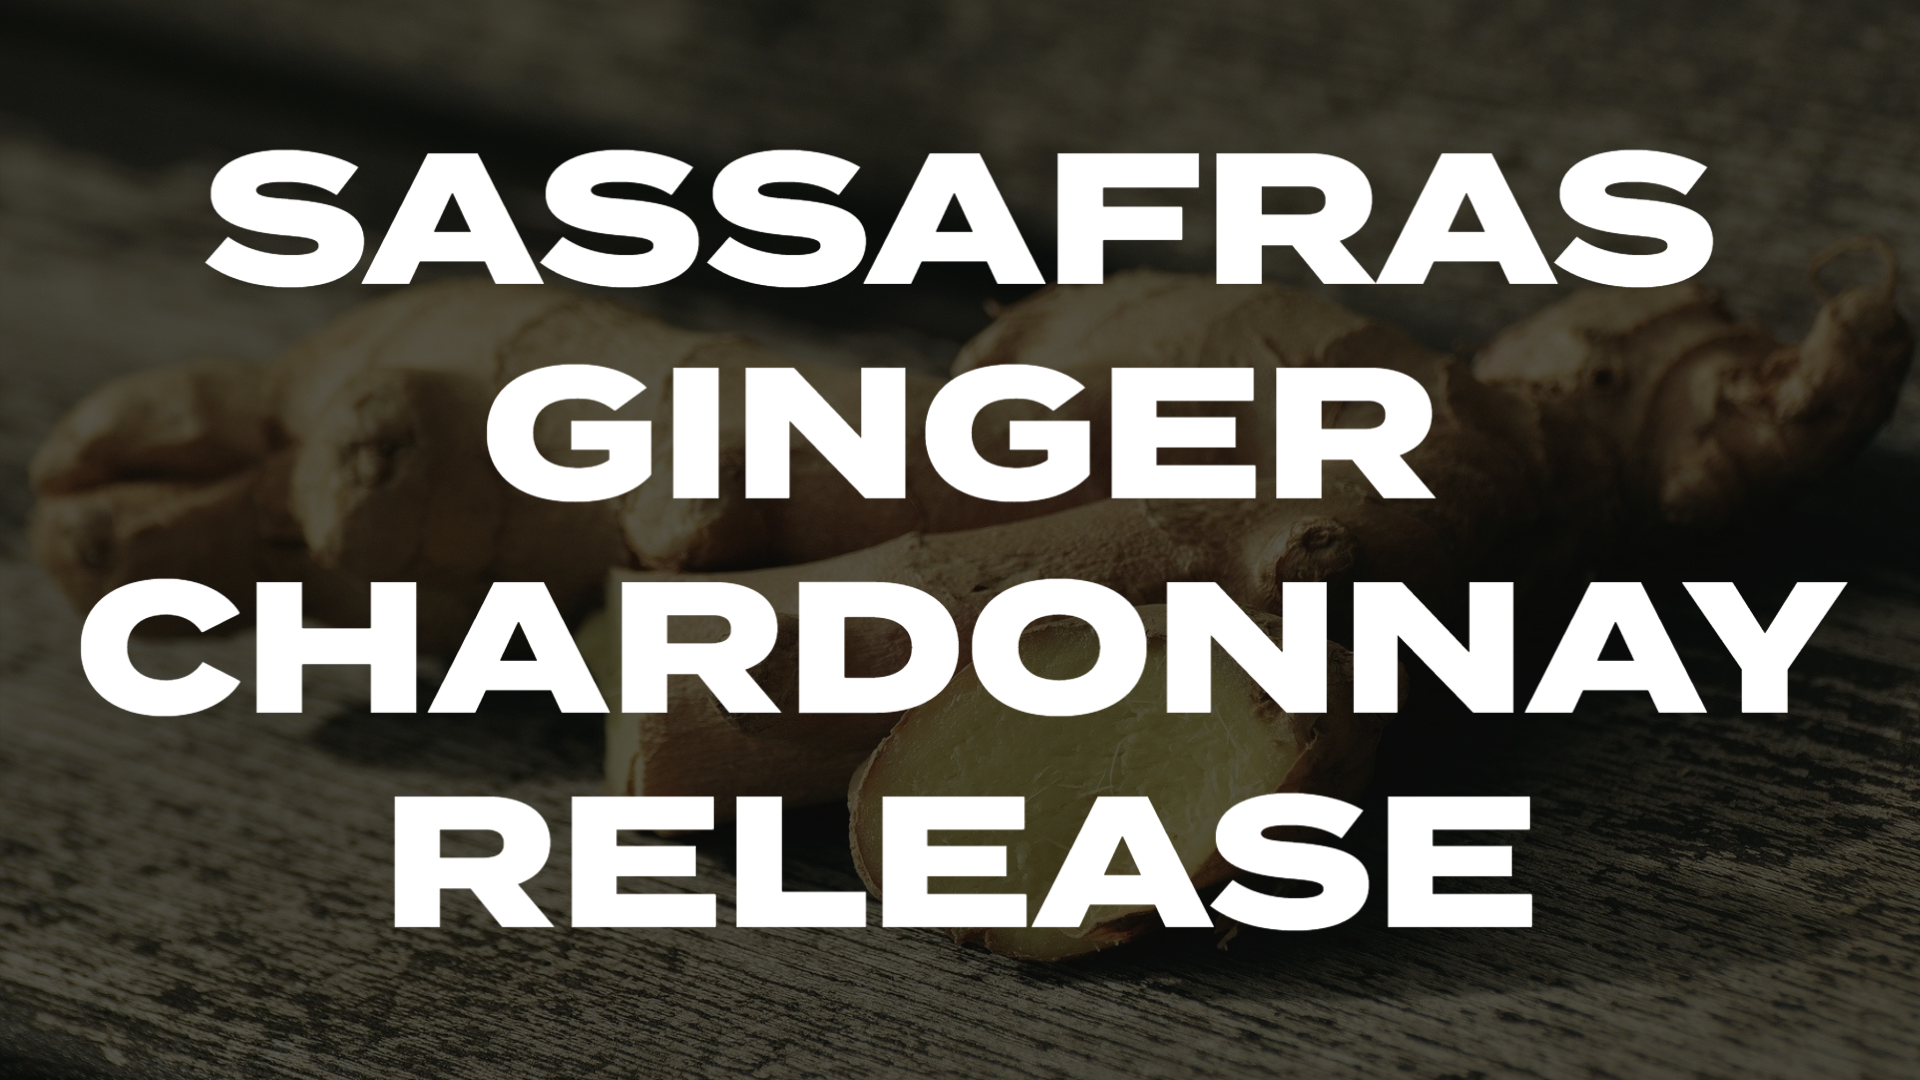 You are currently viewing Sassafras Ginger Chardonnay Release